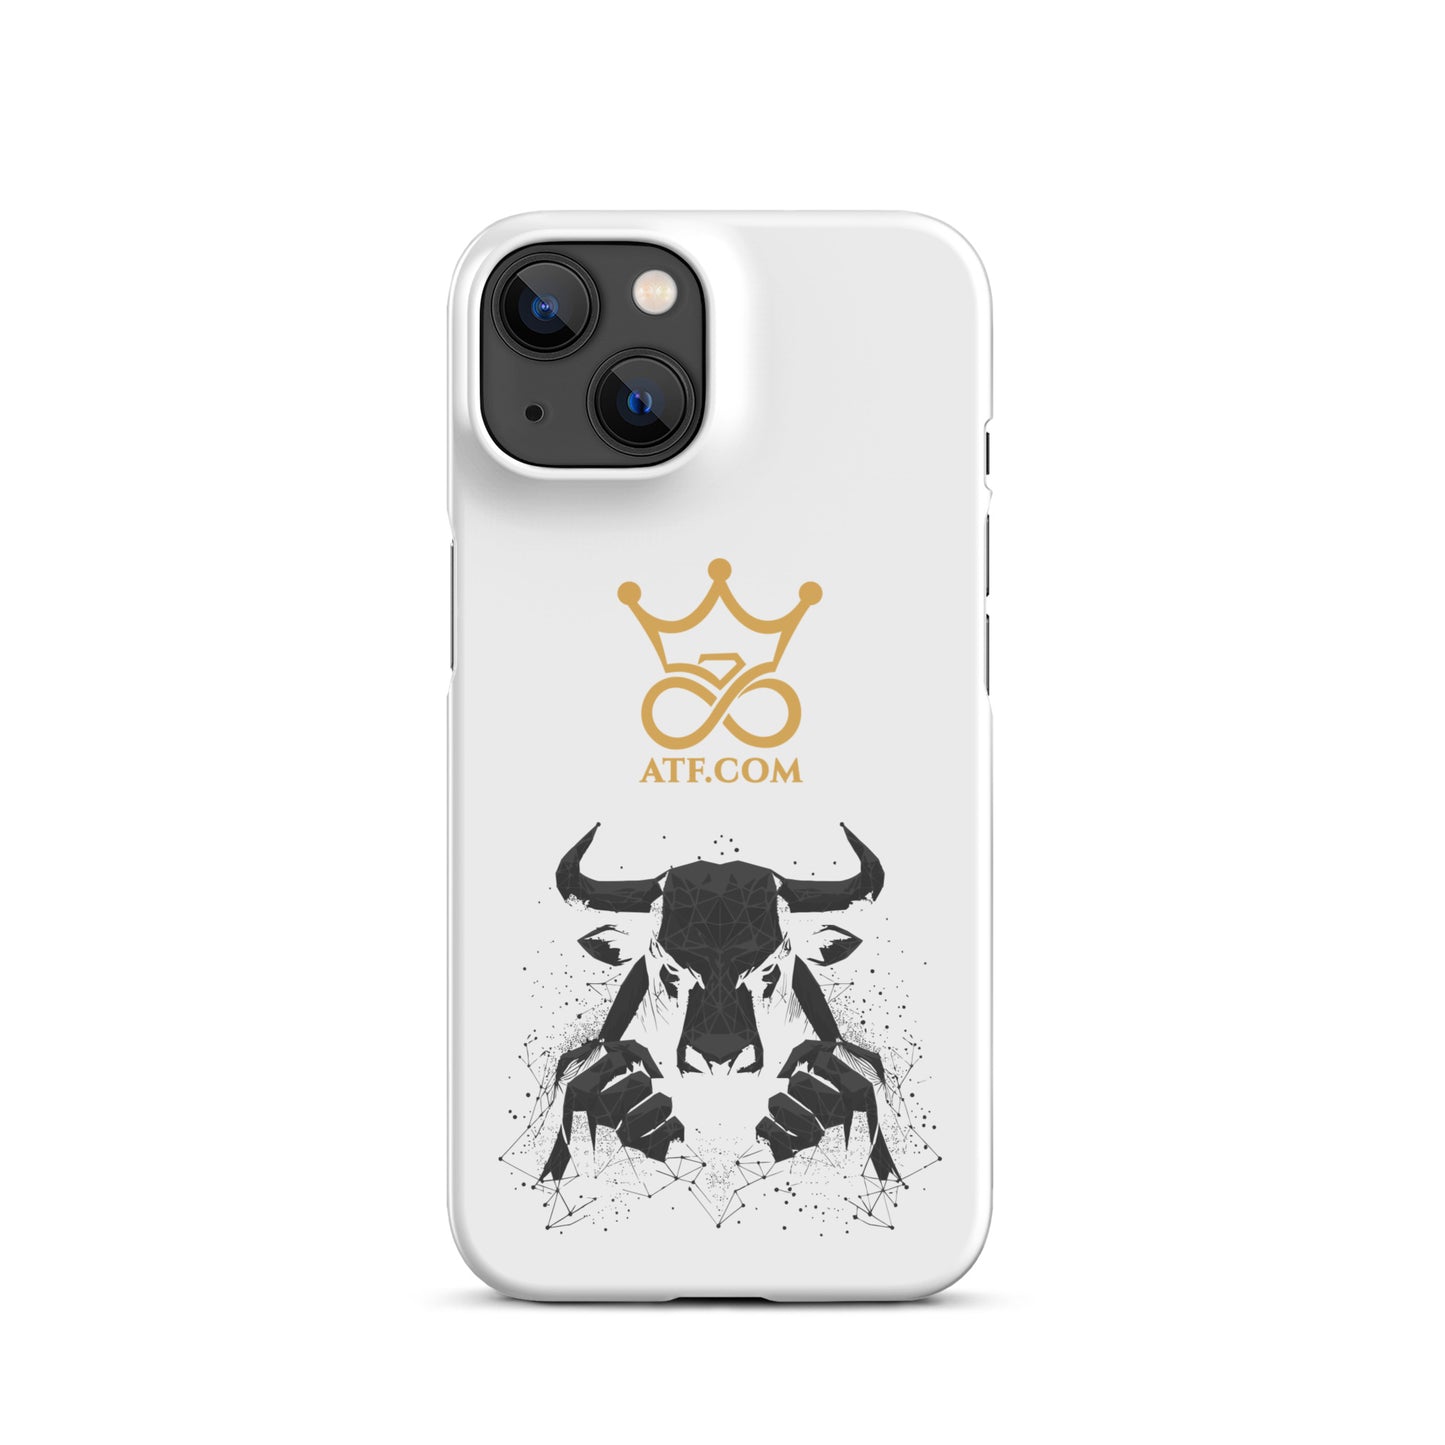 Snap case for iPhone (SKU 0094)